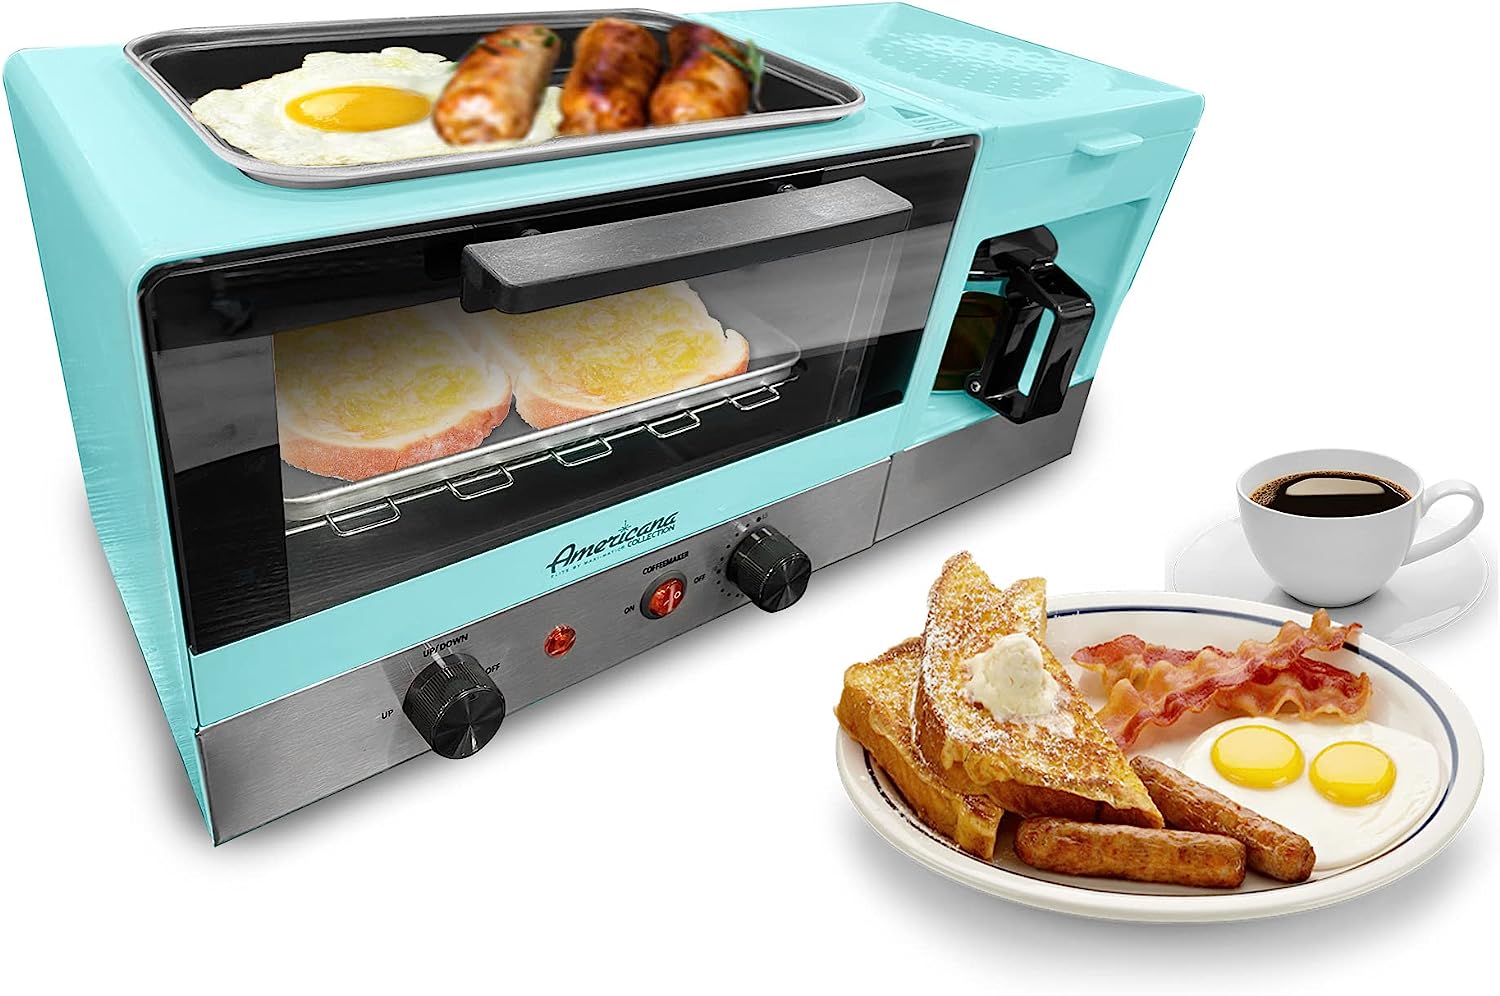 https://bigbigmart.com/wp-content/uploads/2023/07/Elite-Gourmet-Americana-2-Slice-9.5-Griddle-with-Glass-Lid-3-in-1-Breakfast-Center-Station-4-Cup-Coffeemaker-Toaster-Oven-with-15-Min-Timer-Heat-Selector-Mode-Blue-EBK8810BL6.jpg